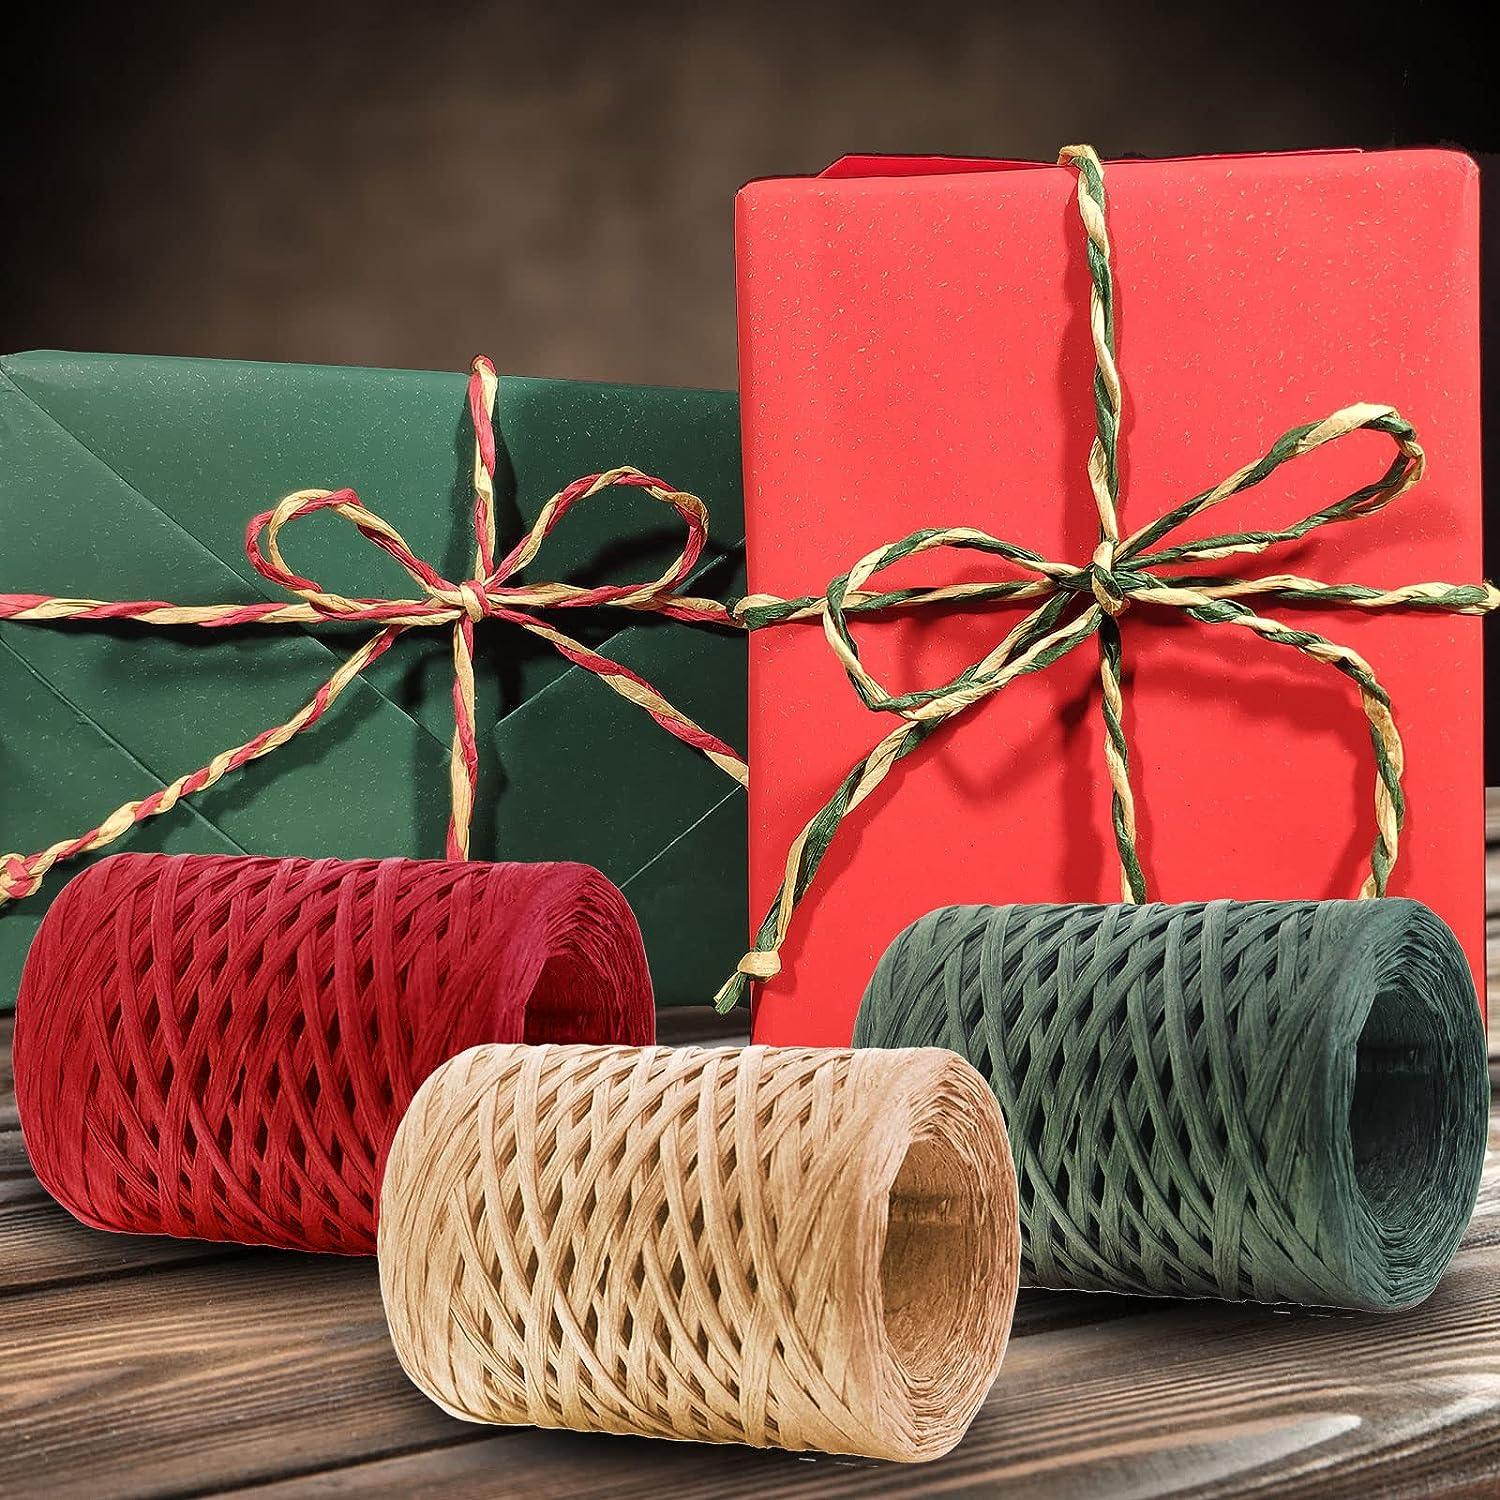 CREATRILL Raffia Ribbon Red Green Natural 3 Rolls 1080 Feet 360 Feet Each  Roll Paper Twine Wrapping Ribbon for Christmas